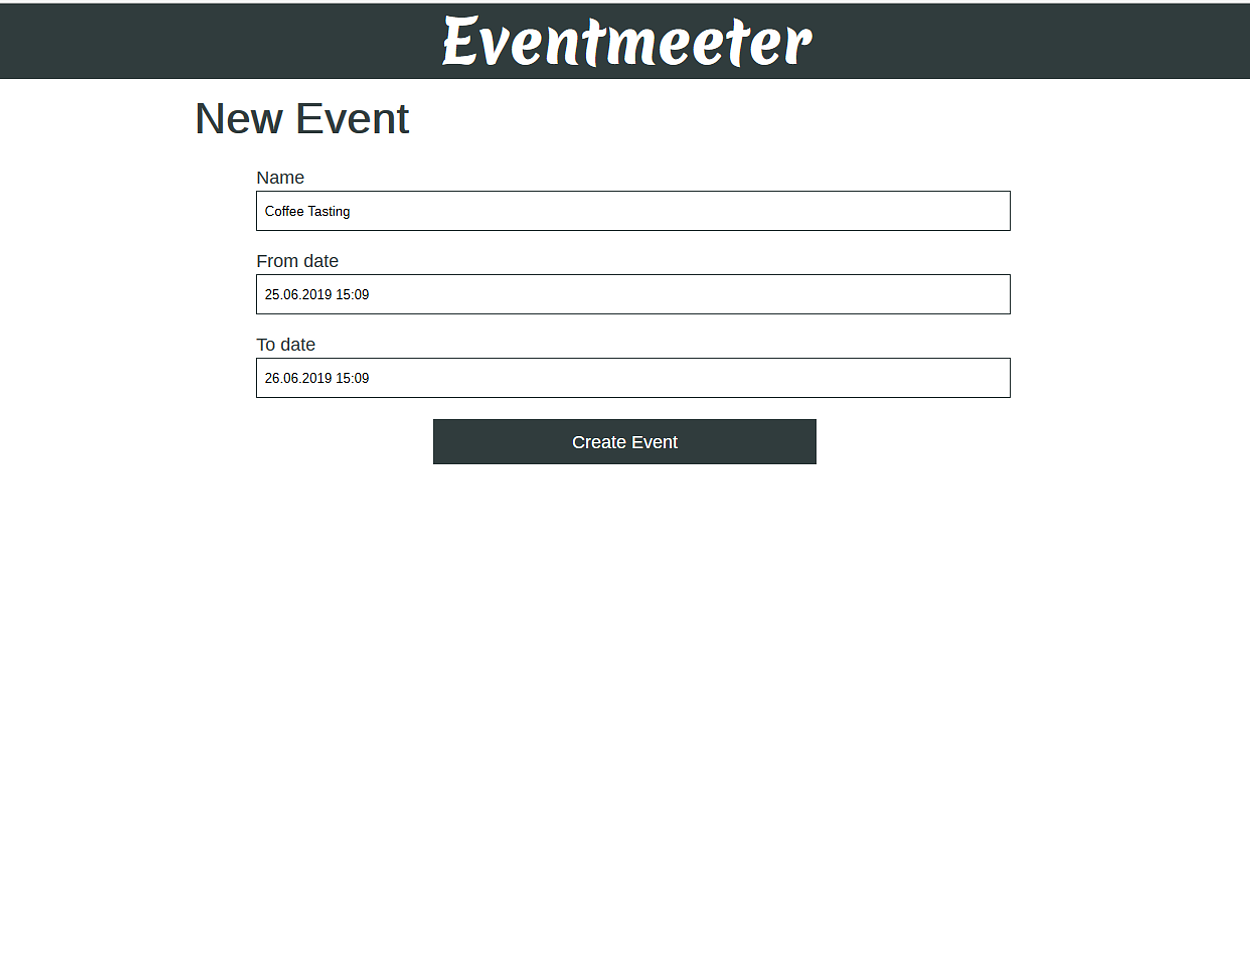 Screen for creating events